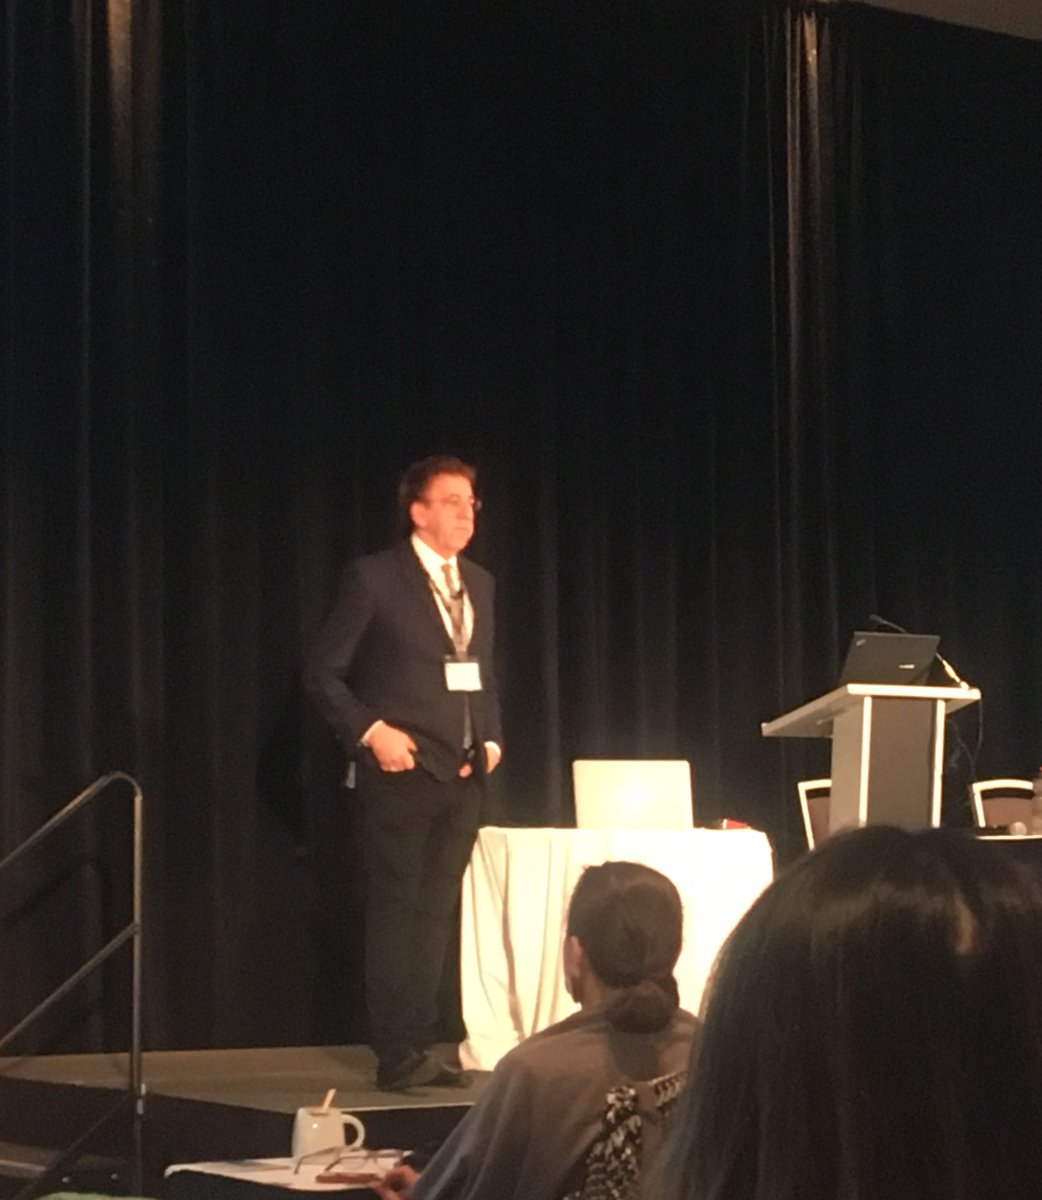 At Day One of the #HarvardLifestyleMedicine Conference starting off strong with @DeanOrnishMD, a pioneer of lifestyle med. #pediatrics #wellnessdoc #backtothebasics #lifestyle